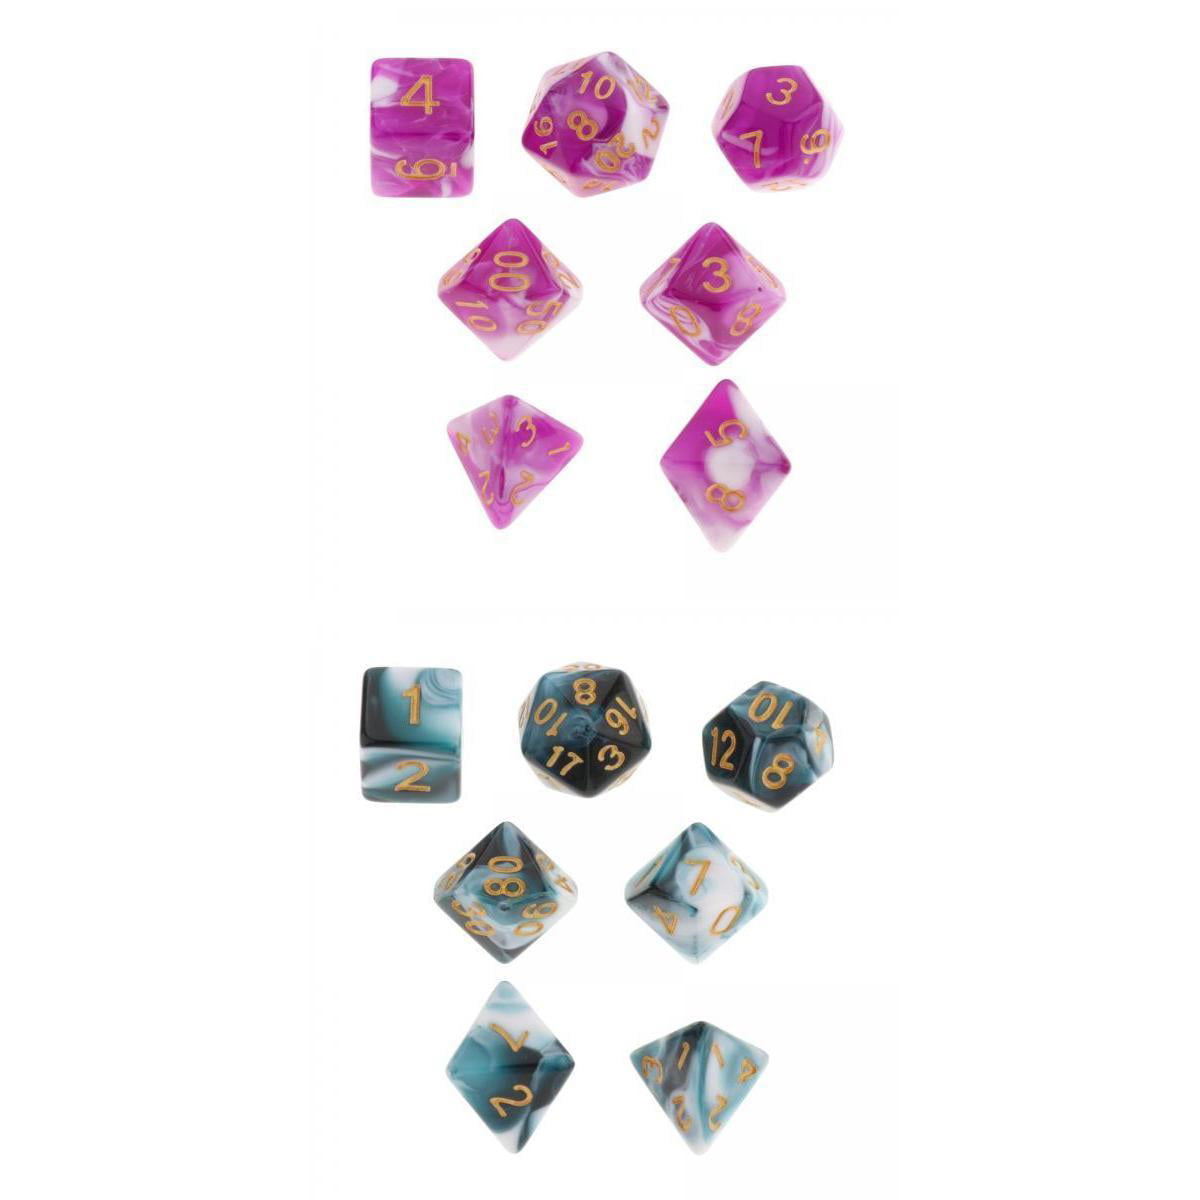 7pcs Purple Polyhedral Dice For DND RPG MTG Board Game For Table Games Props 